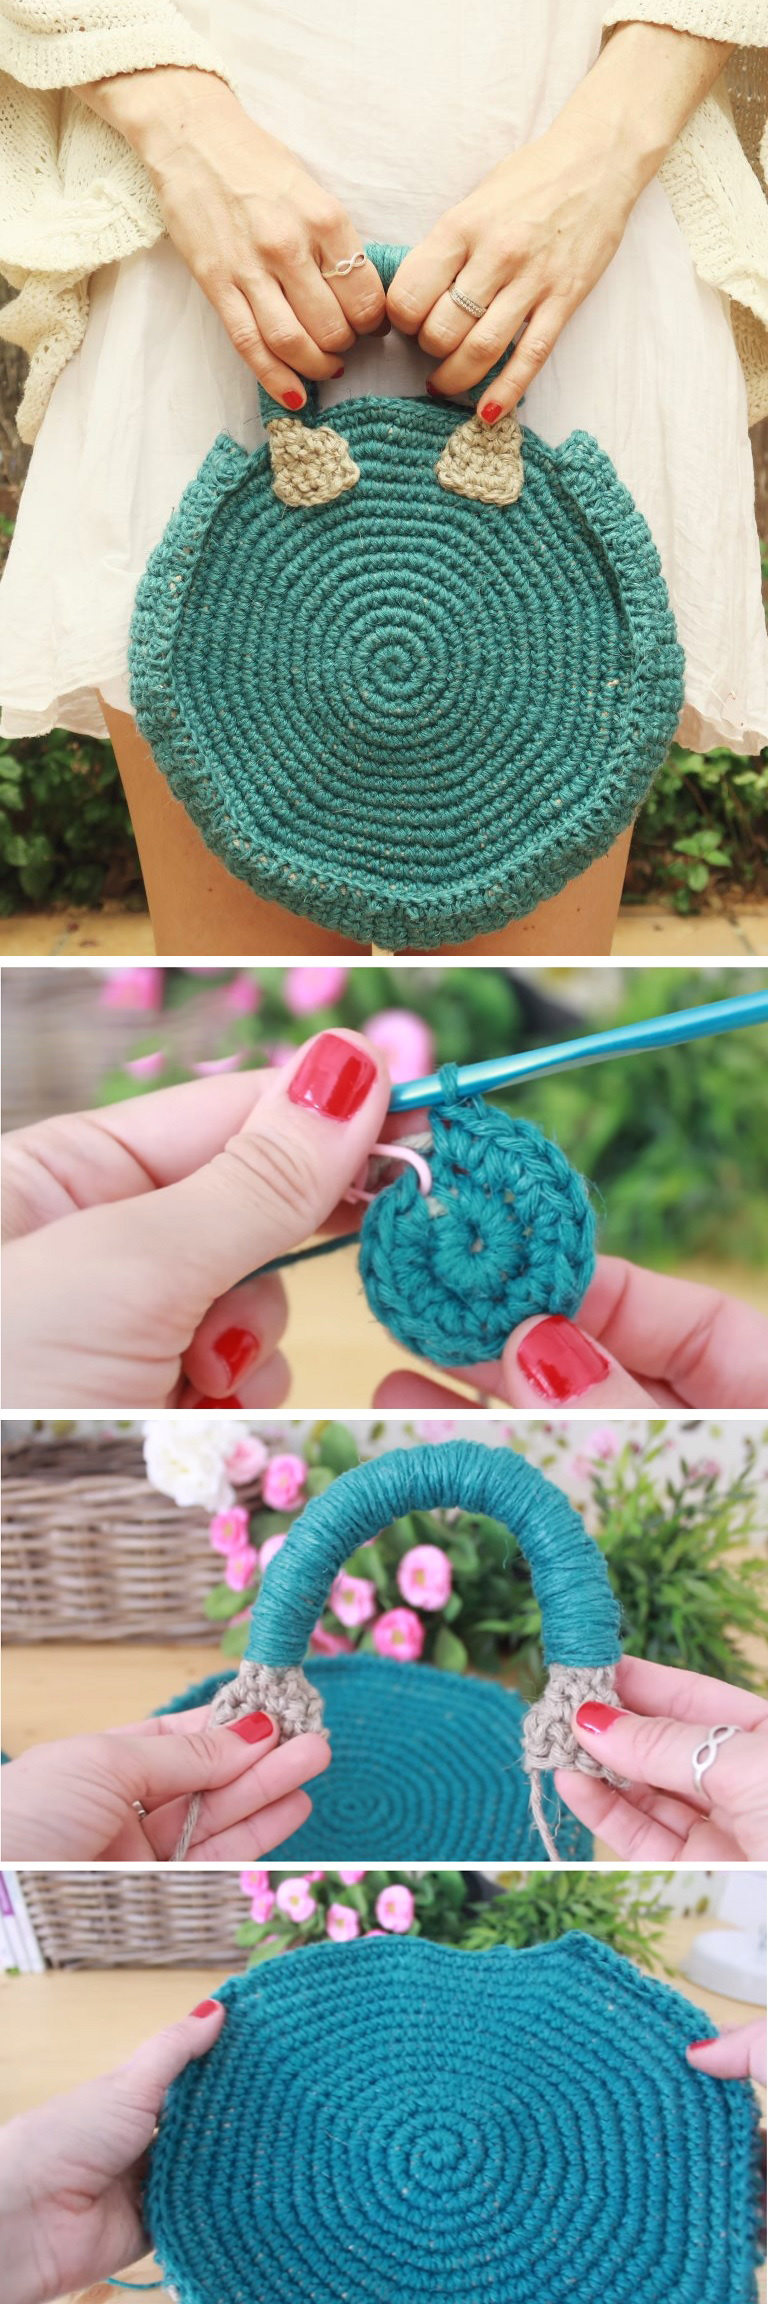 Crochet Pretty Bags for the Summer